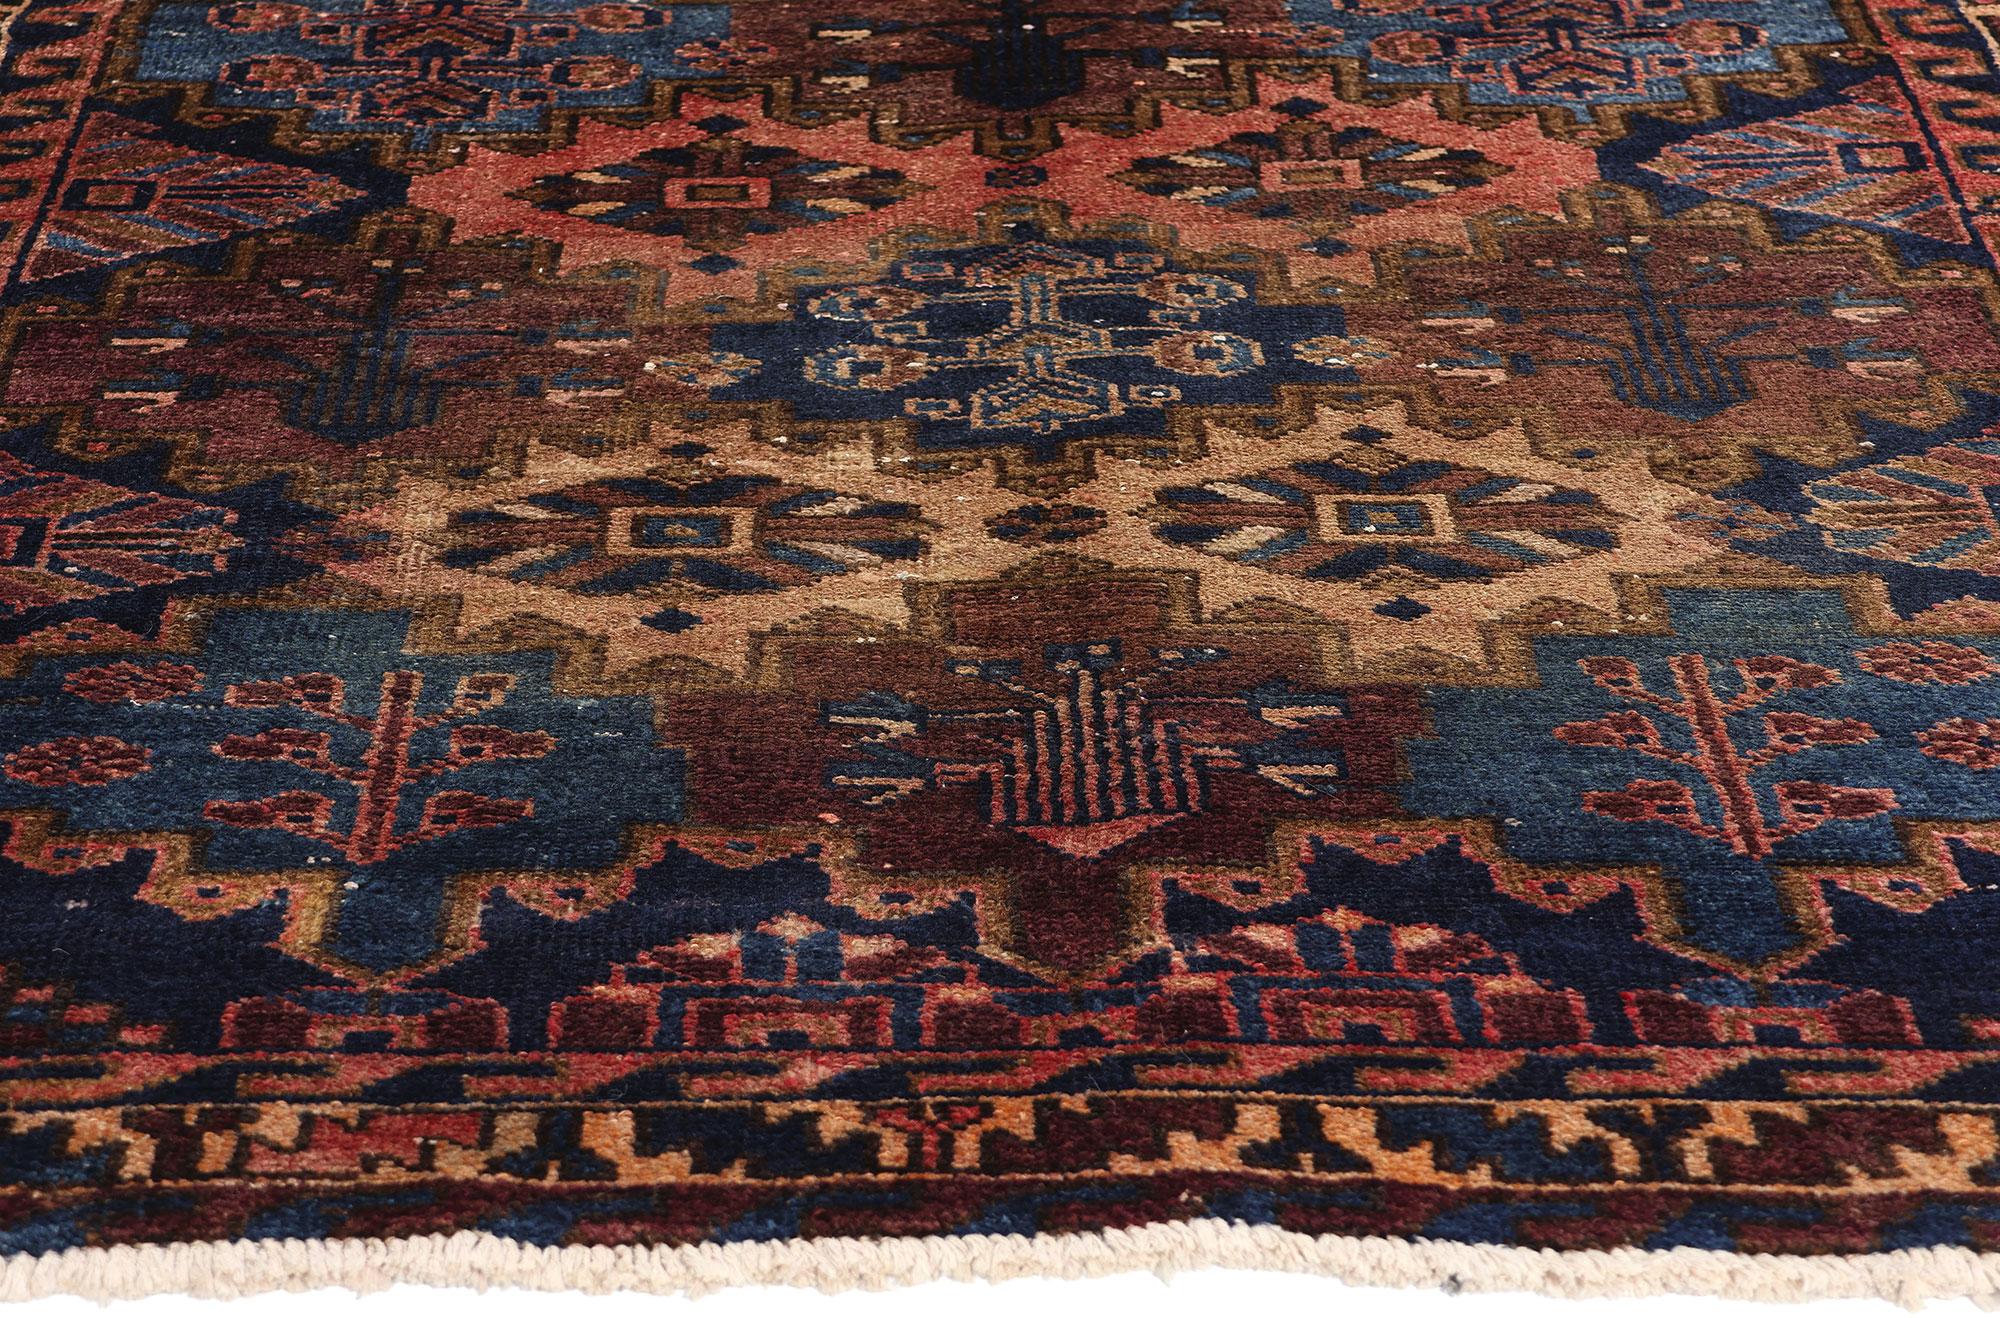 Antique Persian Bakhtiari Rug with Early Victorian Style In Good Condition For Sale In Dallas, TX